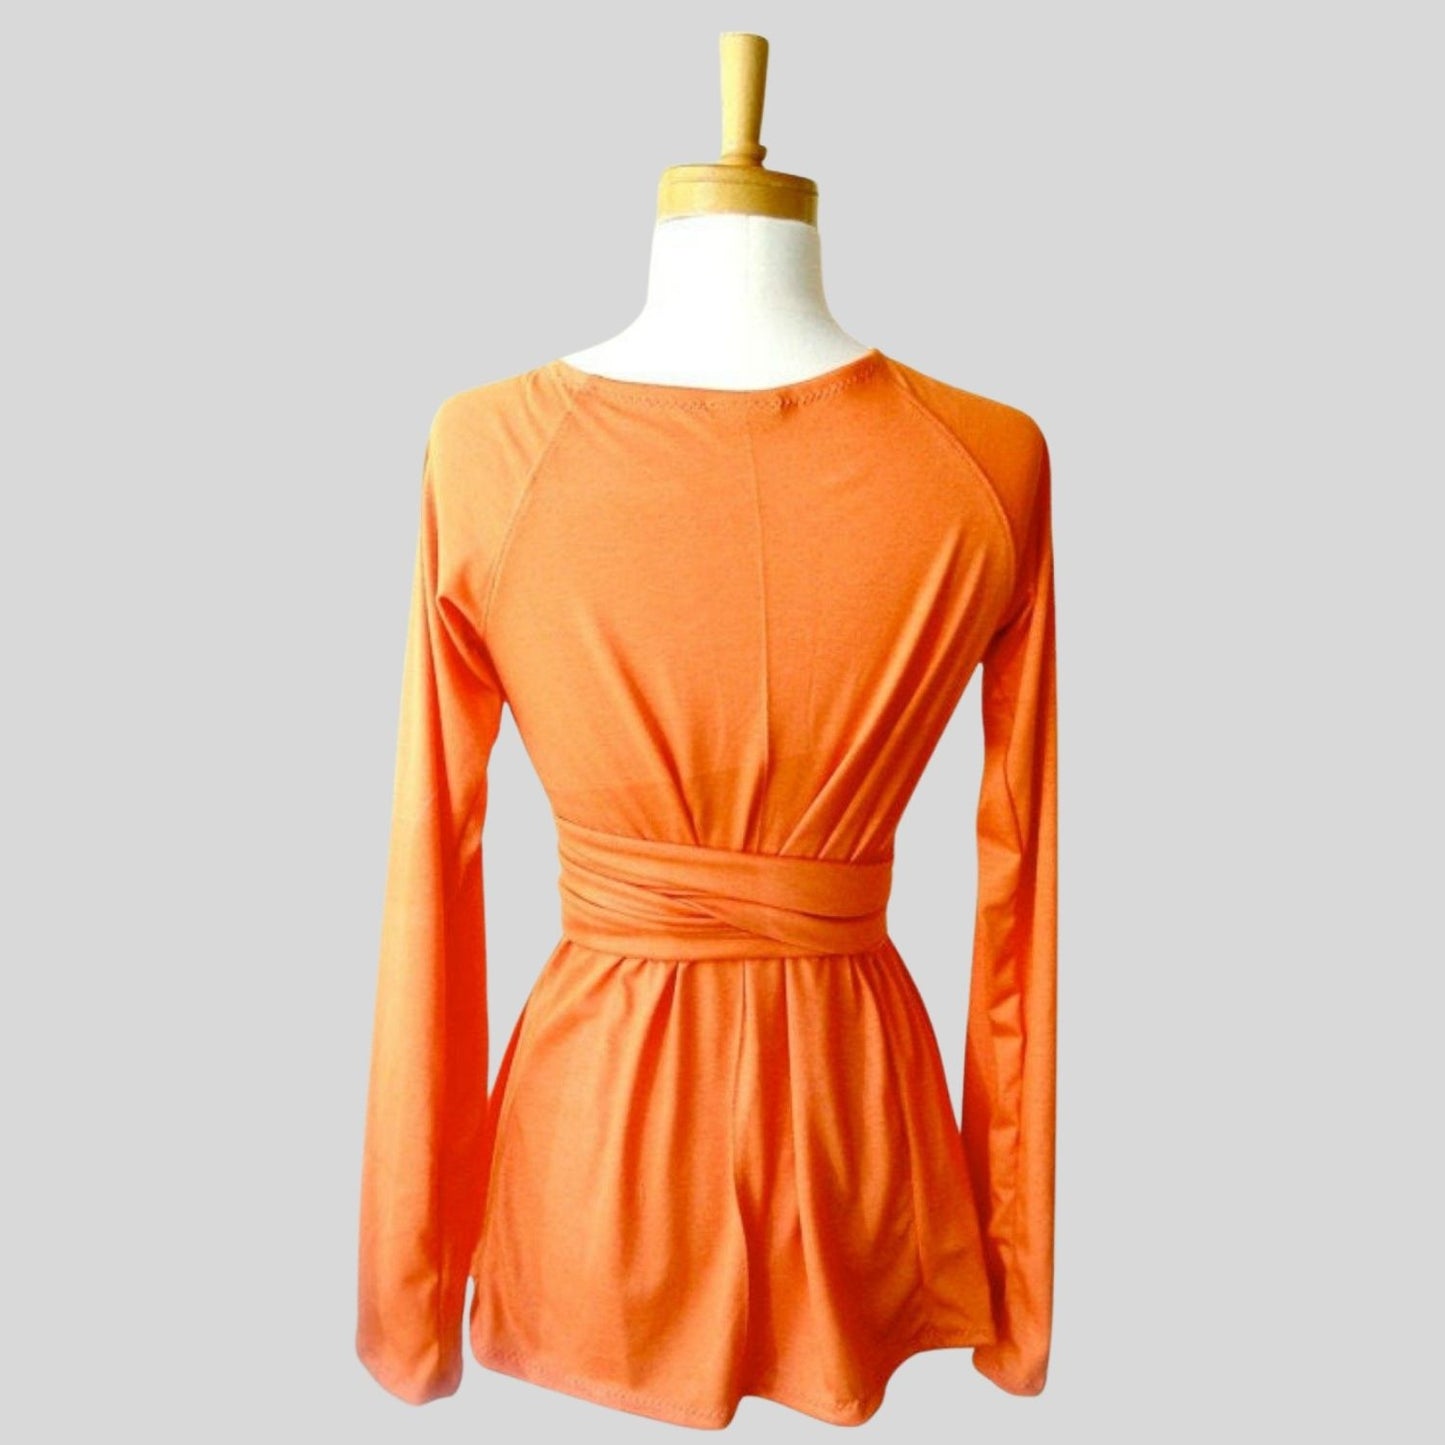 orange cardigan | Organic cotton cardigan with long sleeves | Buy made in Canada women's cardigan tops | Econica Canadian clothing shop for women